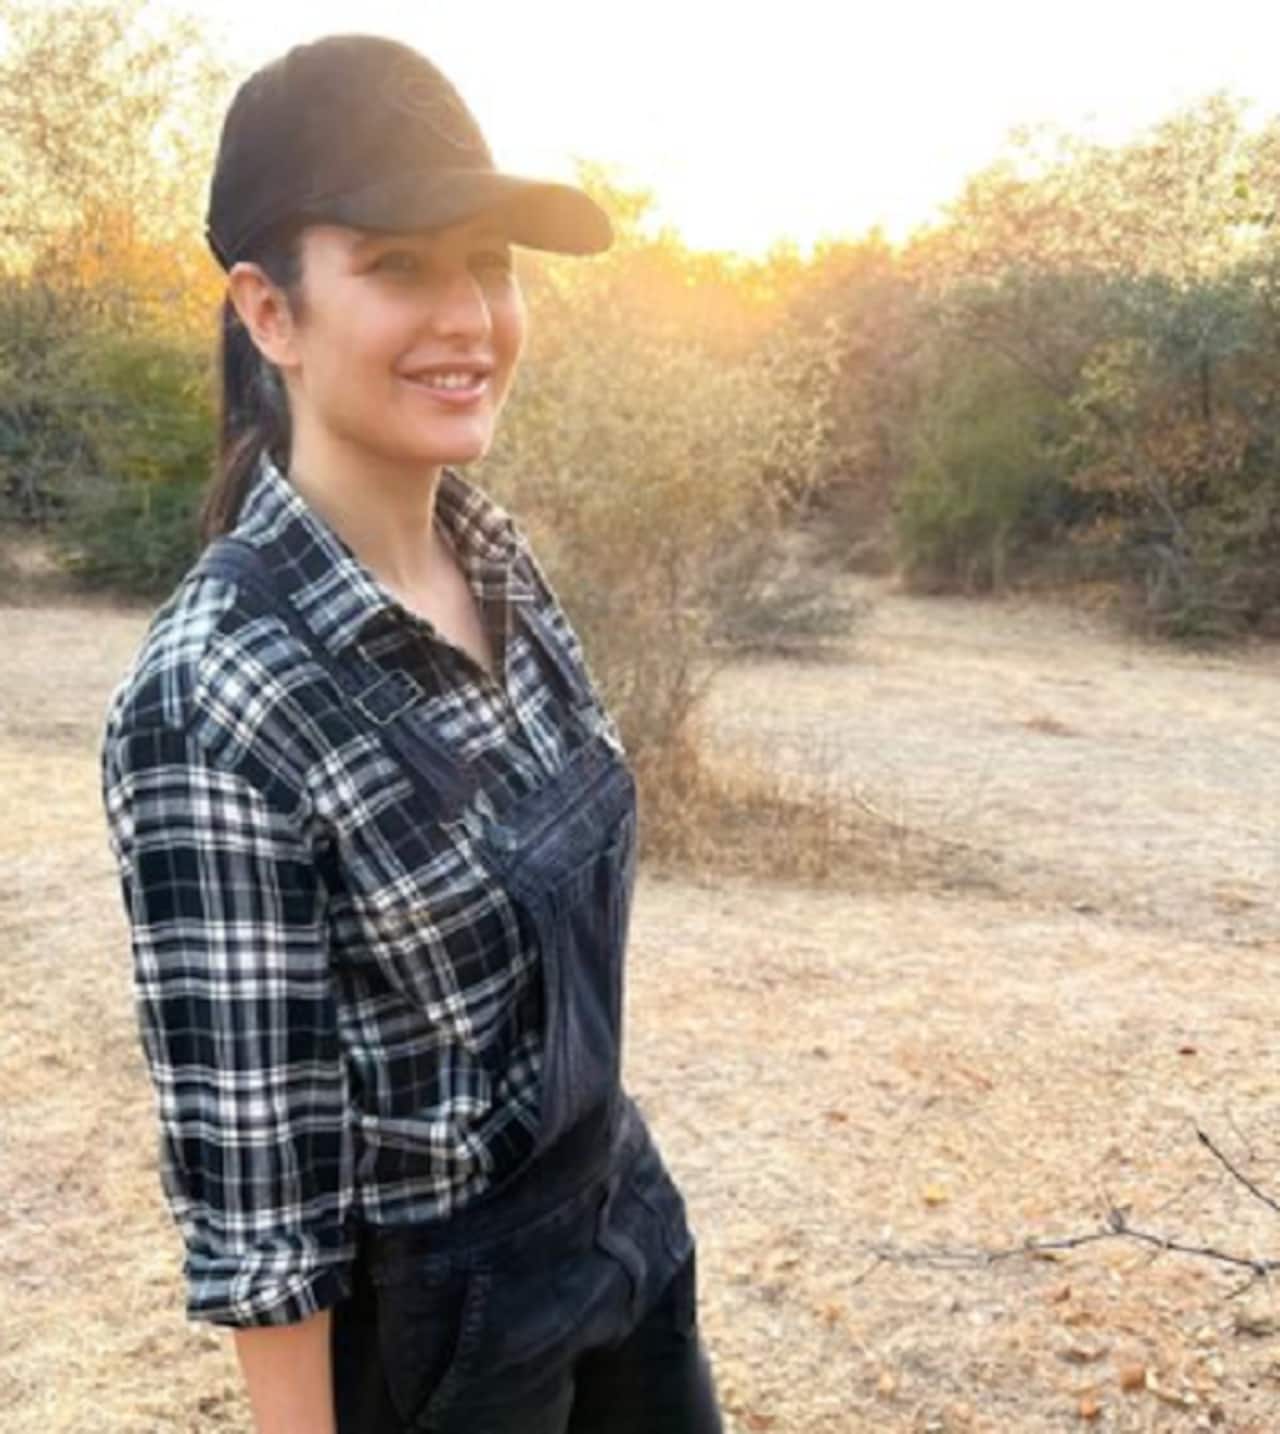 Katrina Kaif looks chic in this black dungaree paired with a checkered shirt